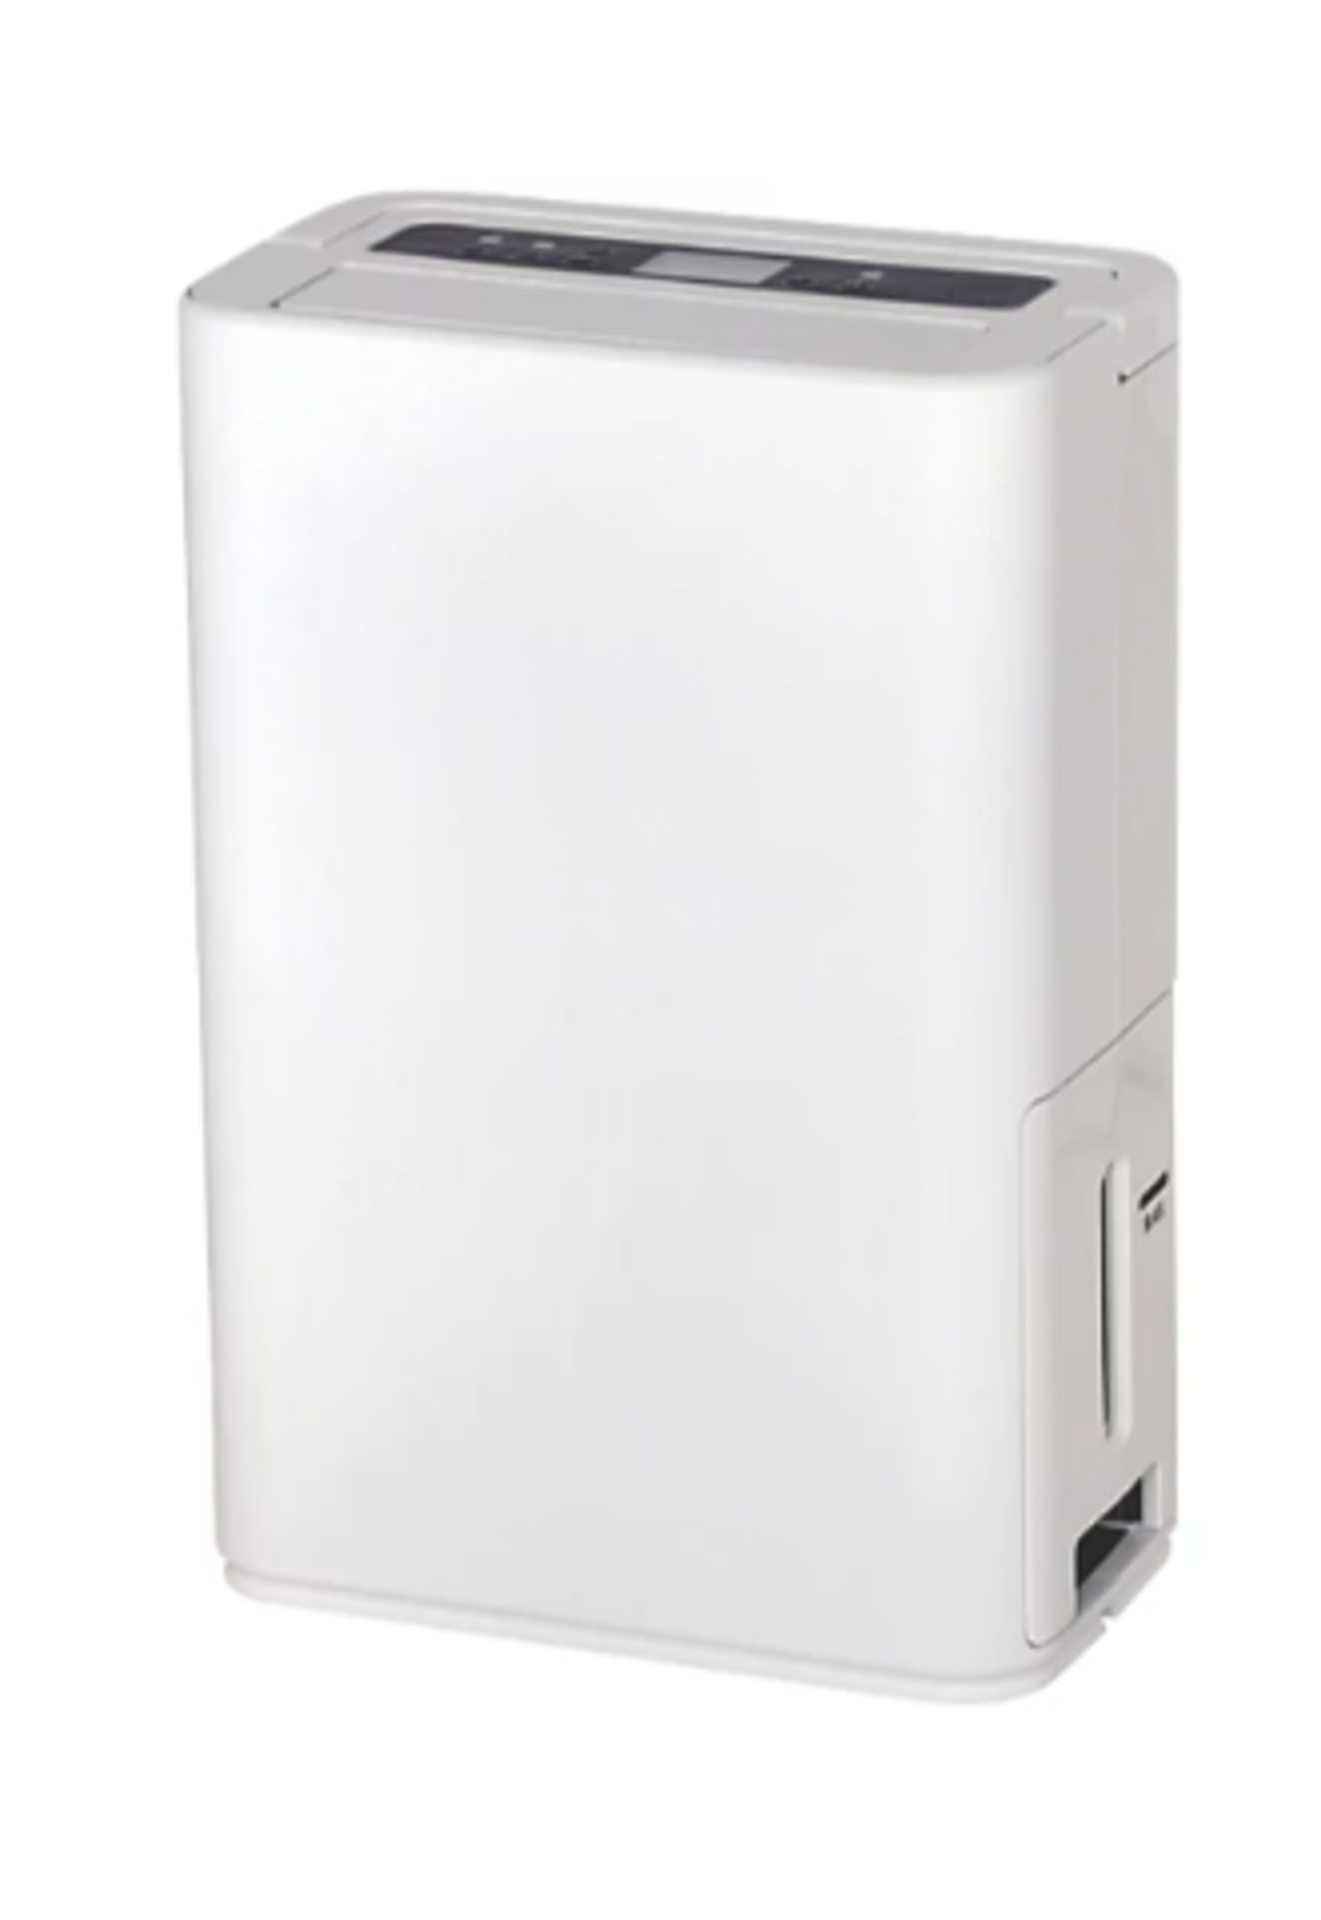 Pallet To Contain 11 x Blyss 16L Dehumidifier. RRP £190 each. This Blyss Excellence 16L Dehumidifier